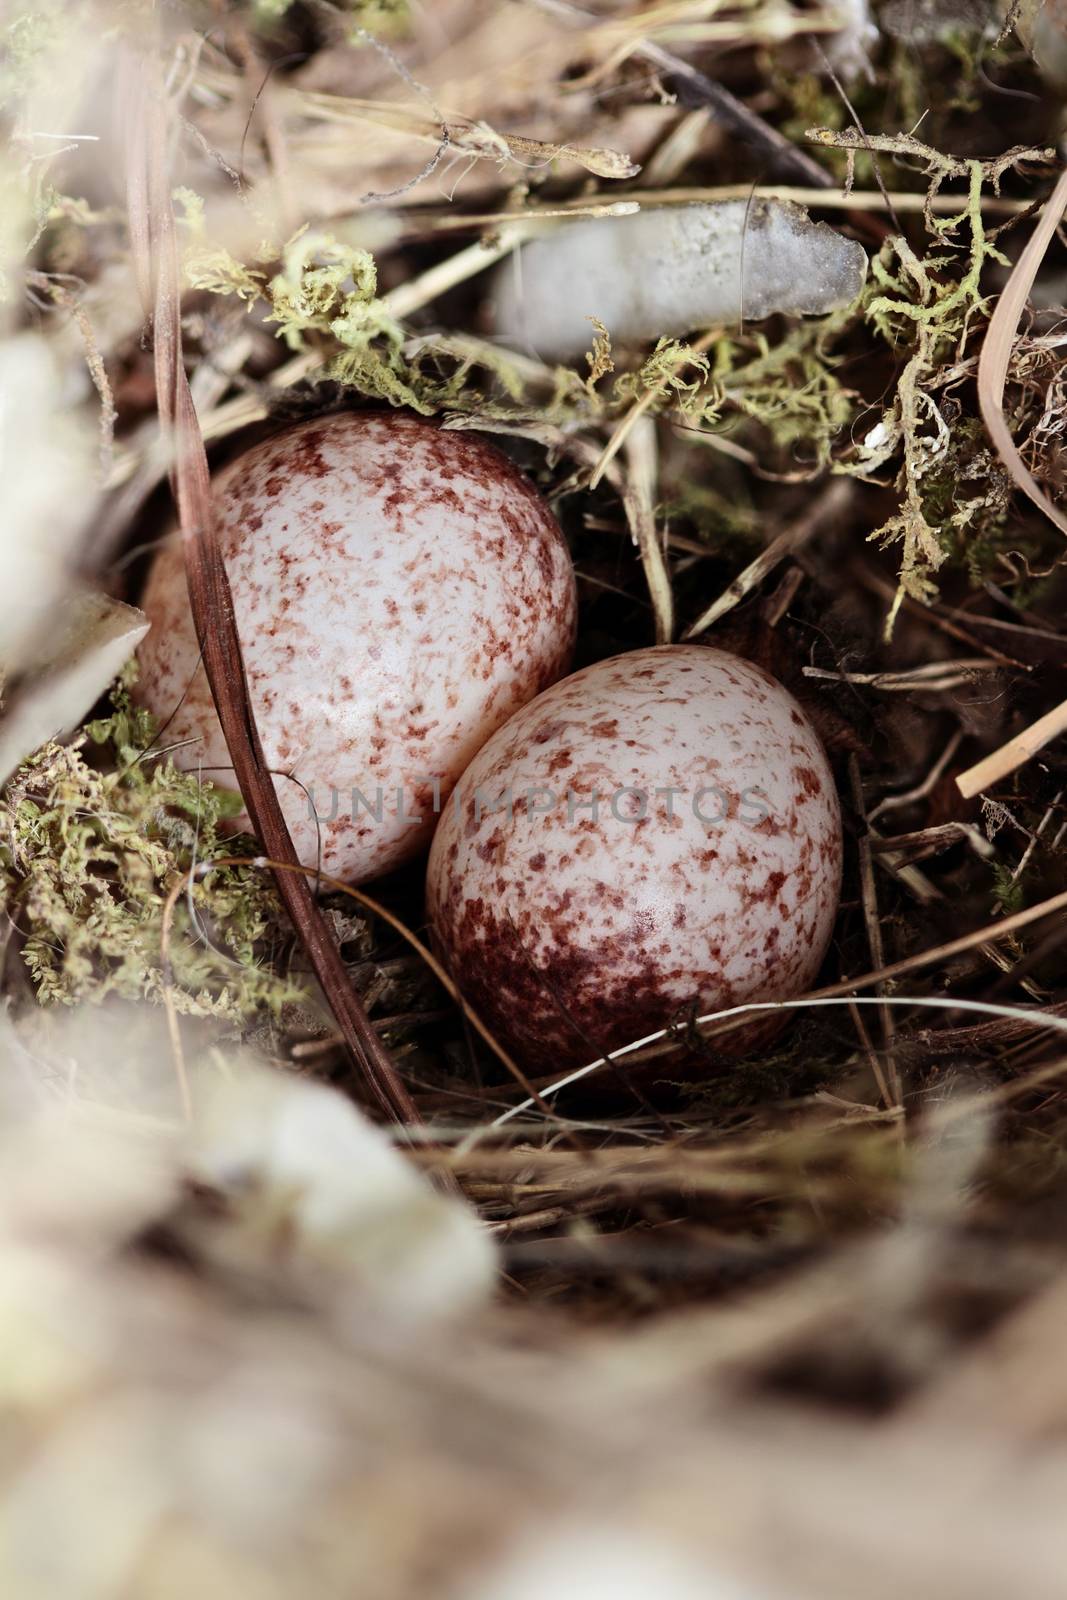 Wren's nest with eggs. Shallow depth of field.